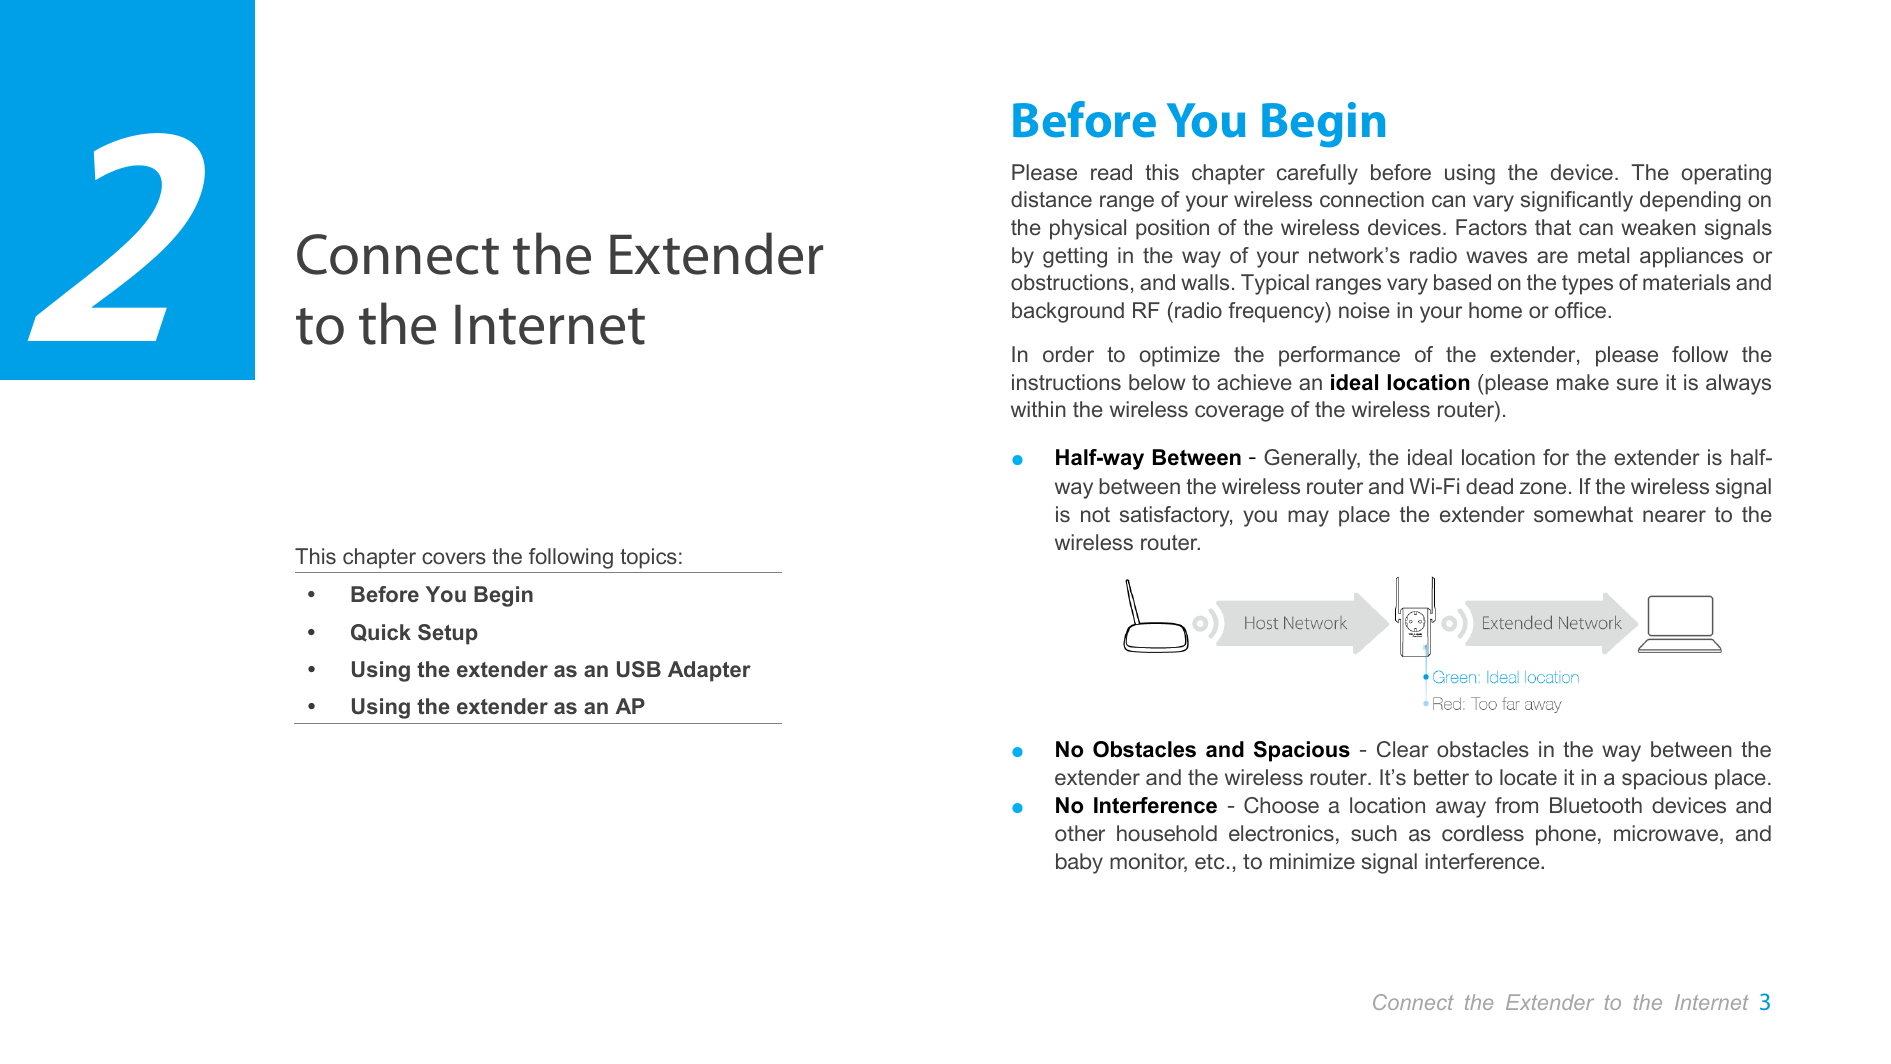  Connect the Extender to the Internet 3  Connect the Extender to the Internet     This chapter covers the following topics:  Before You Begin  Quick Setup  Using the extender as an USB Adapter  Using the extender as an AP Before You Begin Please read this chapter carefully before using the device. The operating distance range of your wireless connection can vary significantly depending on the physical position of the wireless devices. Factors that can weaken signals by getting in the way of your network’s radio waves are metal appliances or obstructions, and walls. Typical ranges vary based on the types of materials and background RF (radio frequency) noise in your home or office. In order to optimize the performance of the extender, please follow the instructions below to achieve an ideal location (please make sure it is always within the wireless coverage of the wireless router). ● Half-way Between - Generally, the ideal location for the extender is half-way between the wireless router and Wi-Fi dead zone. If the wireless signal is not satisfactory, you may place the extender somewhat nearer to the wireless router.  ● No Obstacles and Spacious - Clear obstacles in the way between the extender and the wireless router. It’s better to locate it in a spacious place. ● No Interference -  Choose a location away from Bluetooth devices and other household electronics, such as cordless phone, microwave, and baby monitor, etc., to minimize signal interference.  2 